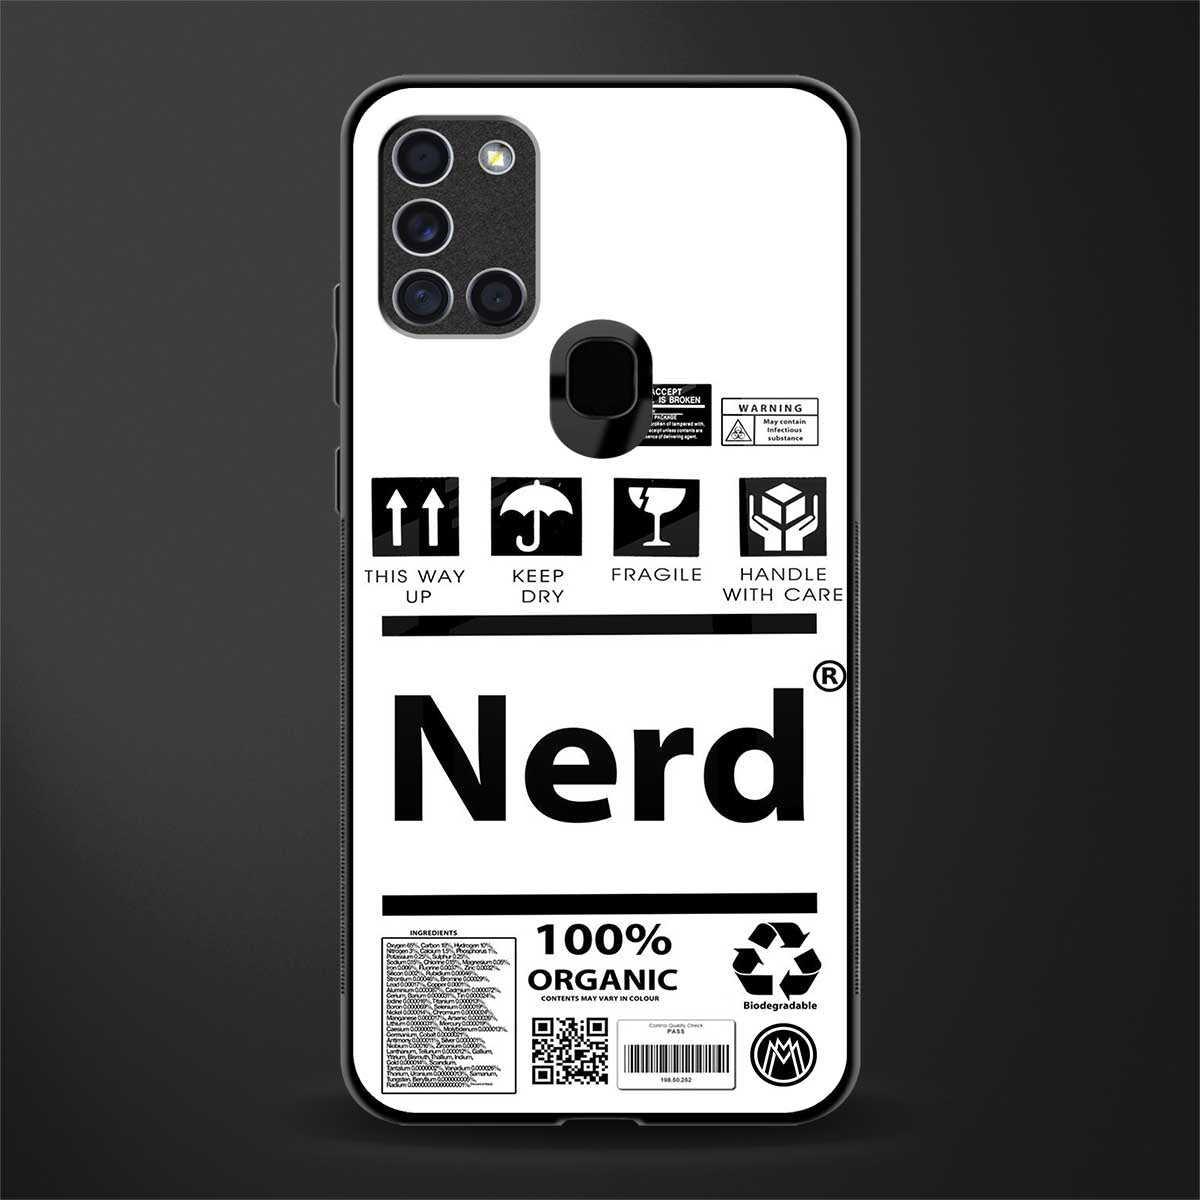 nerd white label glass case for samsung galaxy a21s image